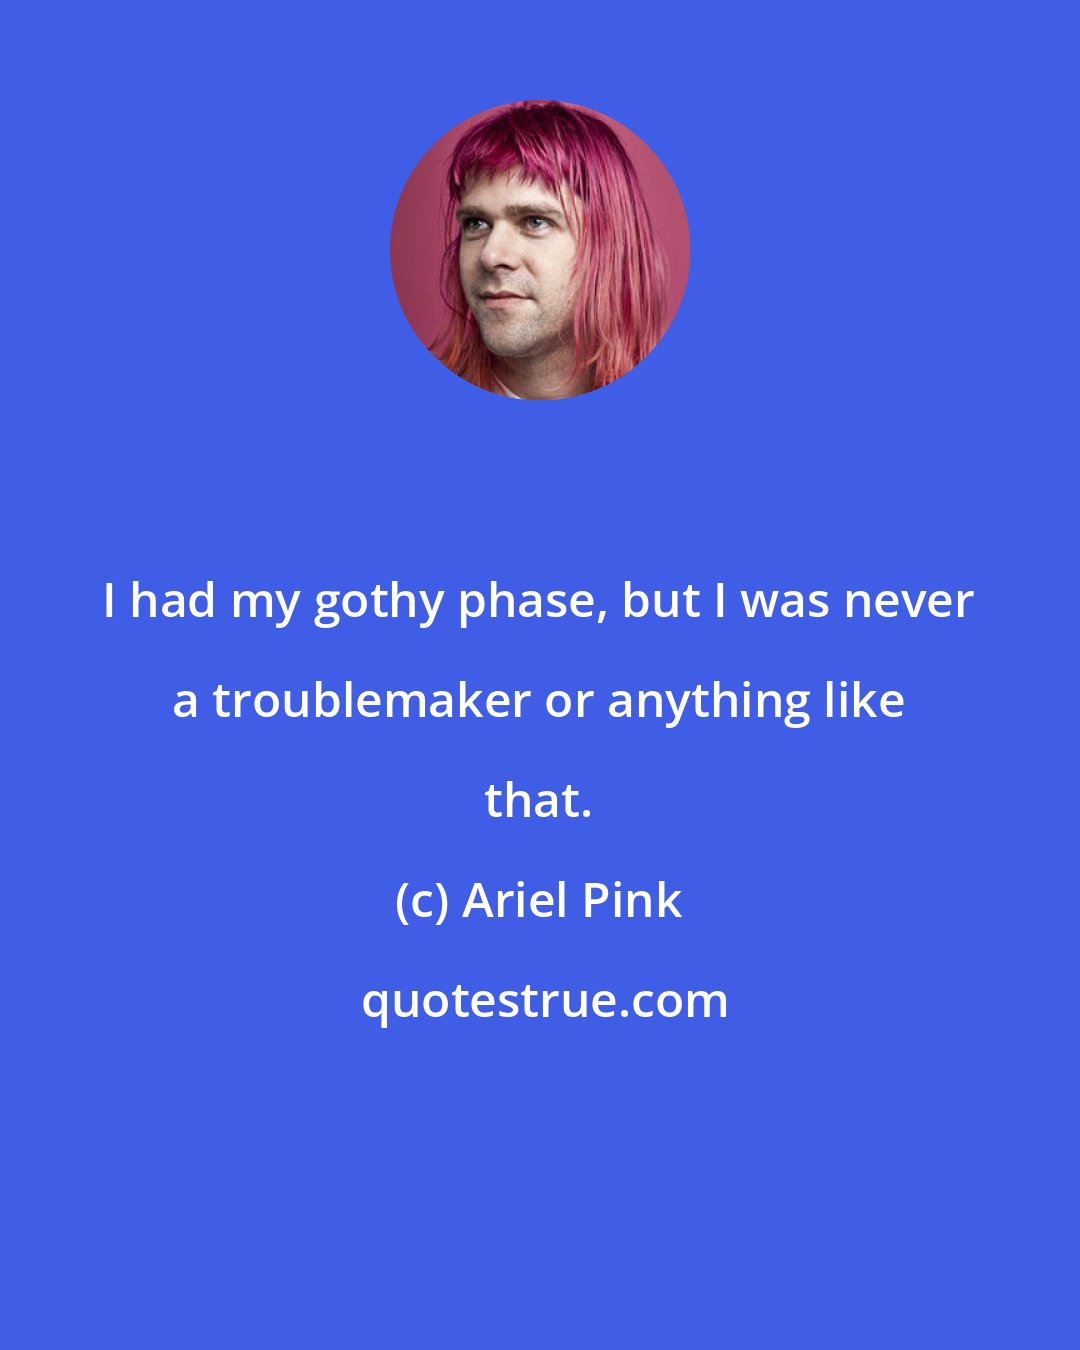 Ariel Pink: I had my gothy phase, but I was never a troublemaker or anything like that.